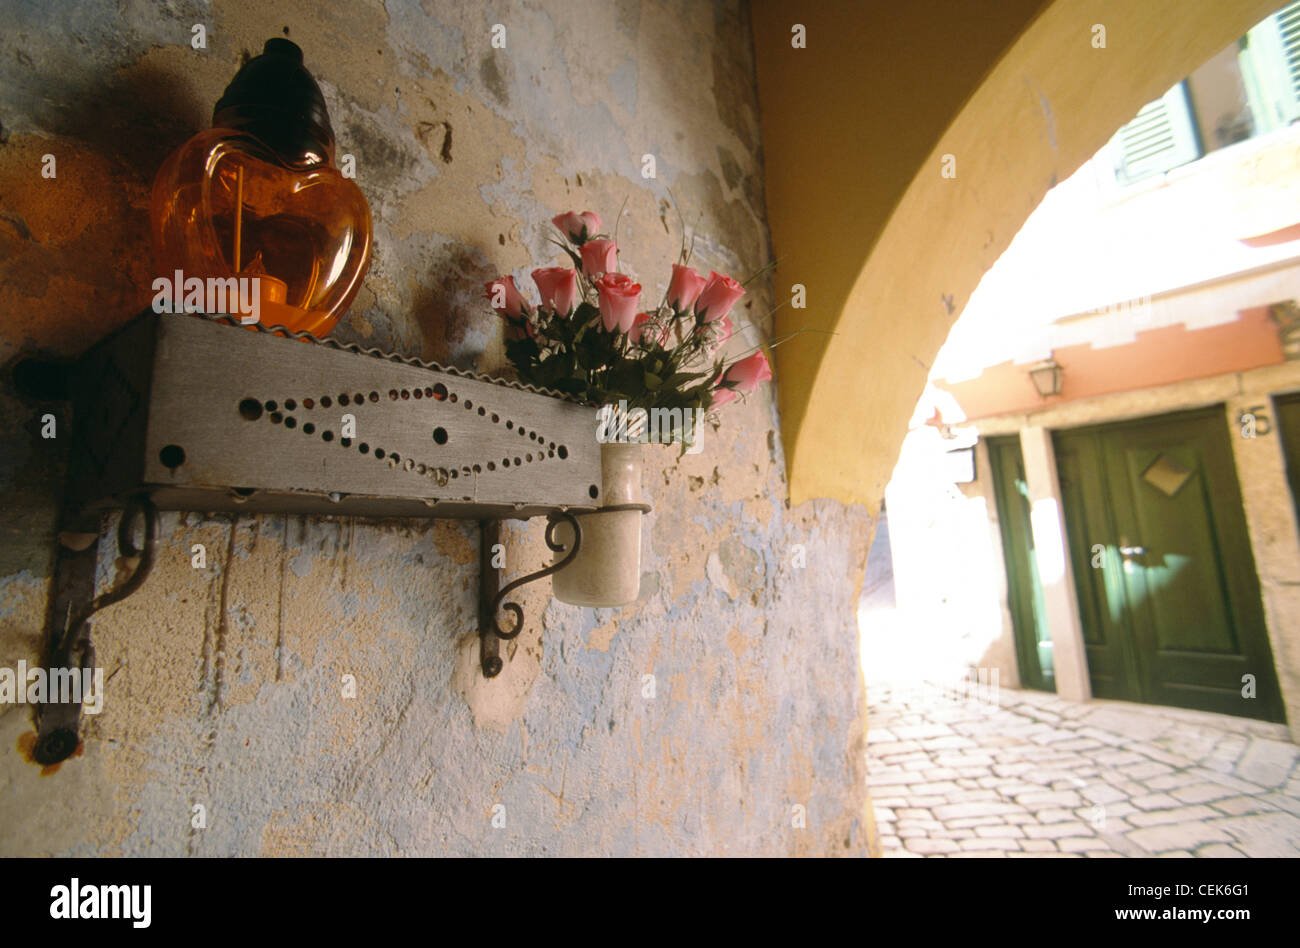 Candlelight and flowers of a public altar fixed at a wall in Rovinj, Istria, Croatia Stock Photo